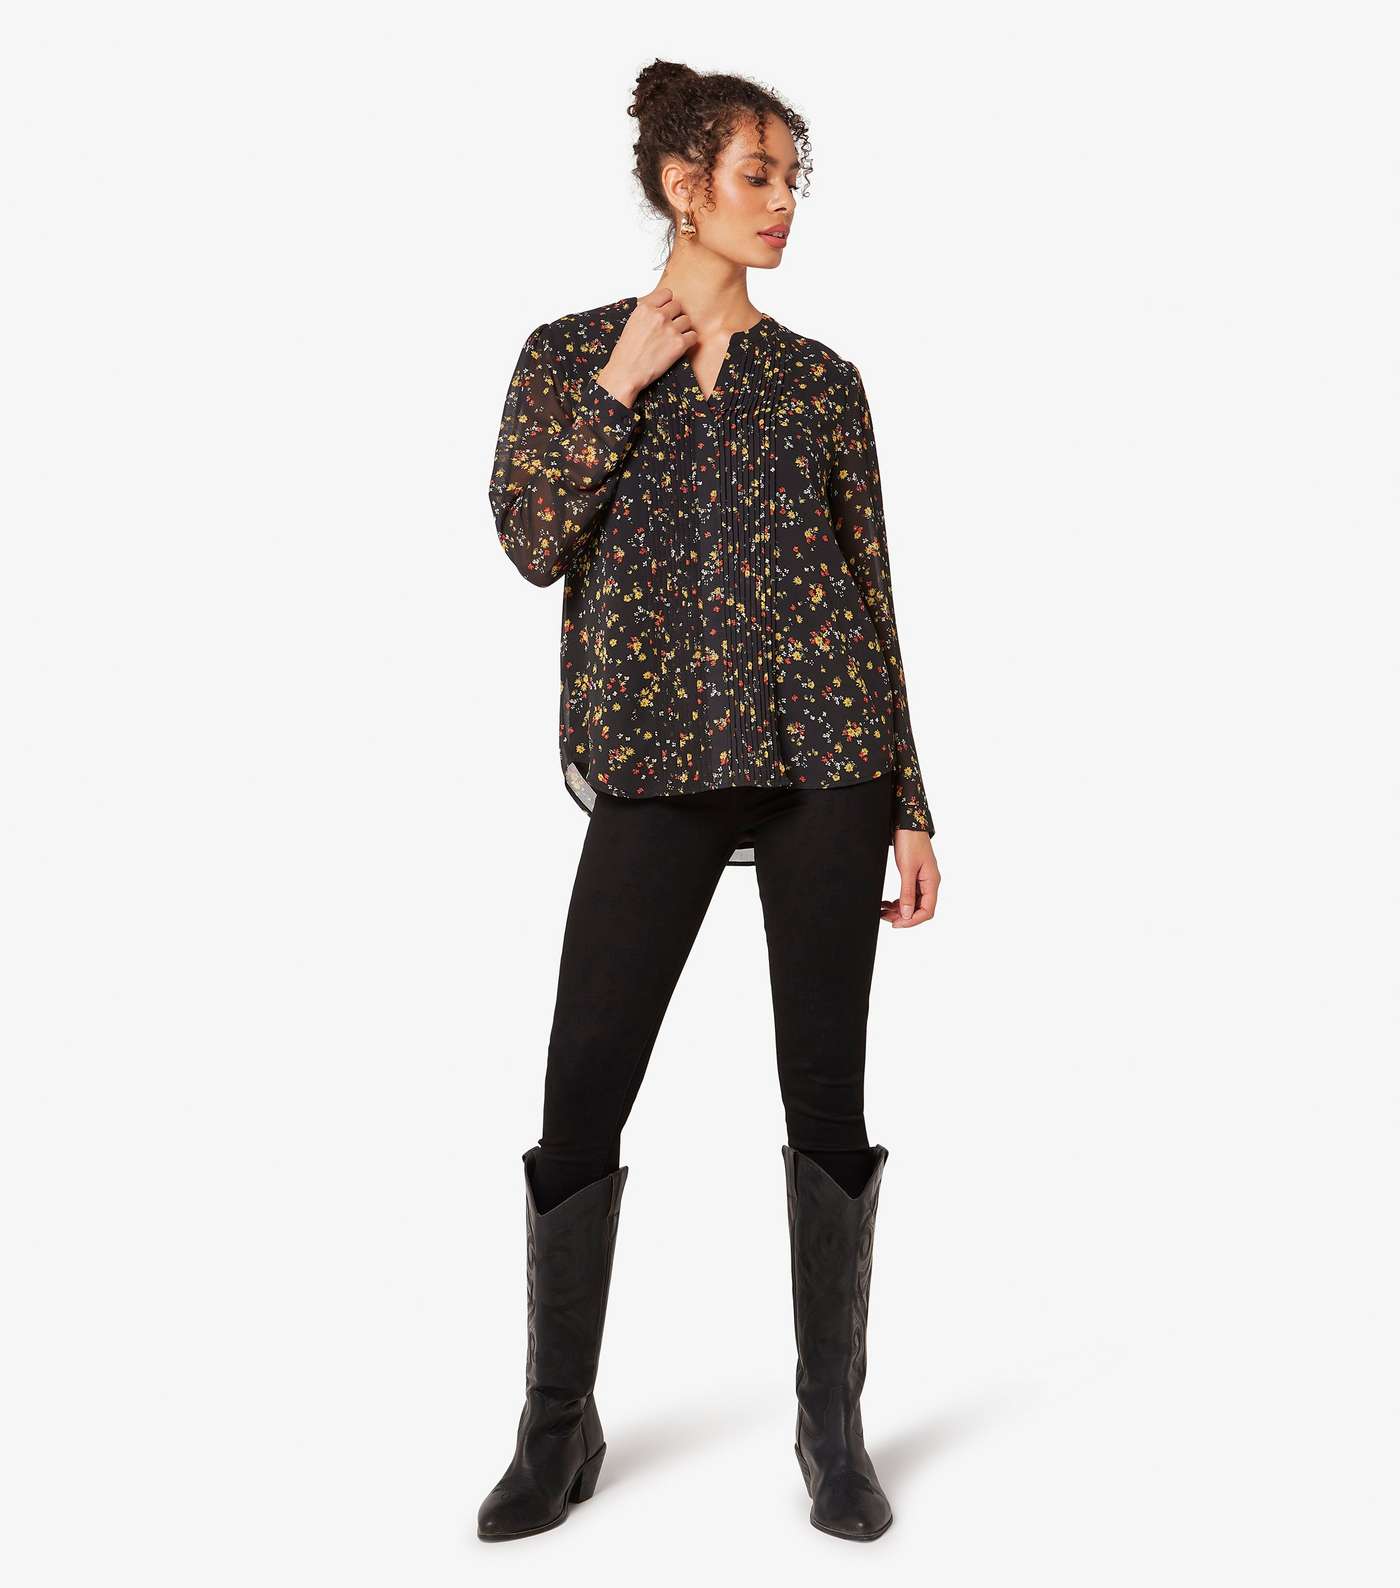 Apricot Black Ditsy Floral Long Sleeve Top Image 2